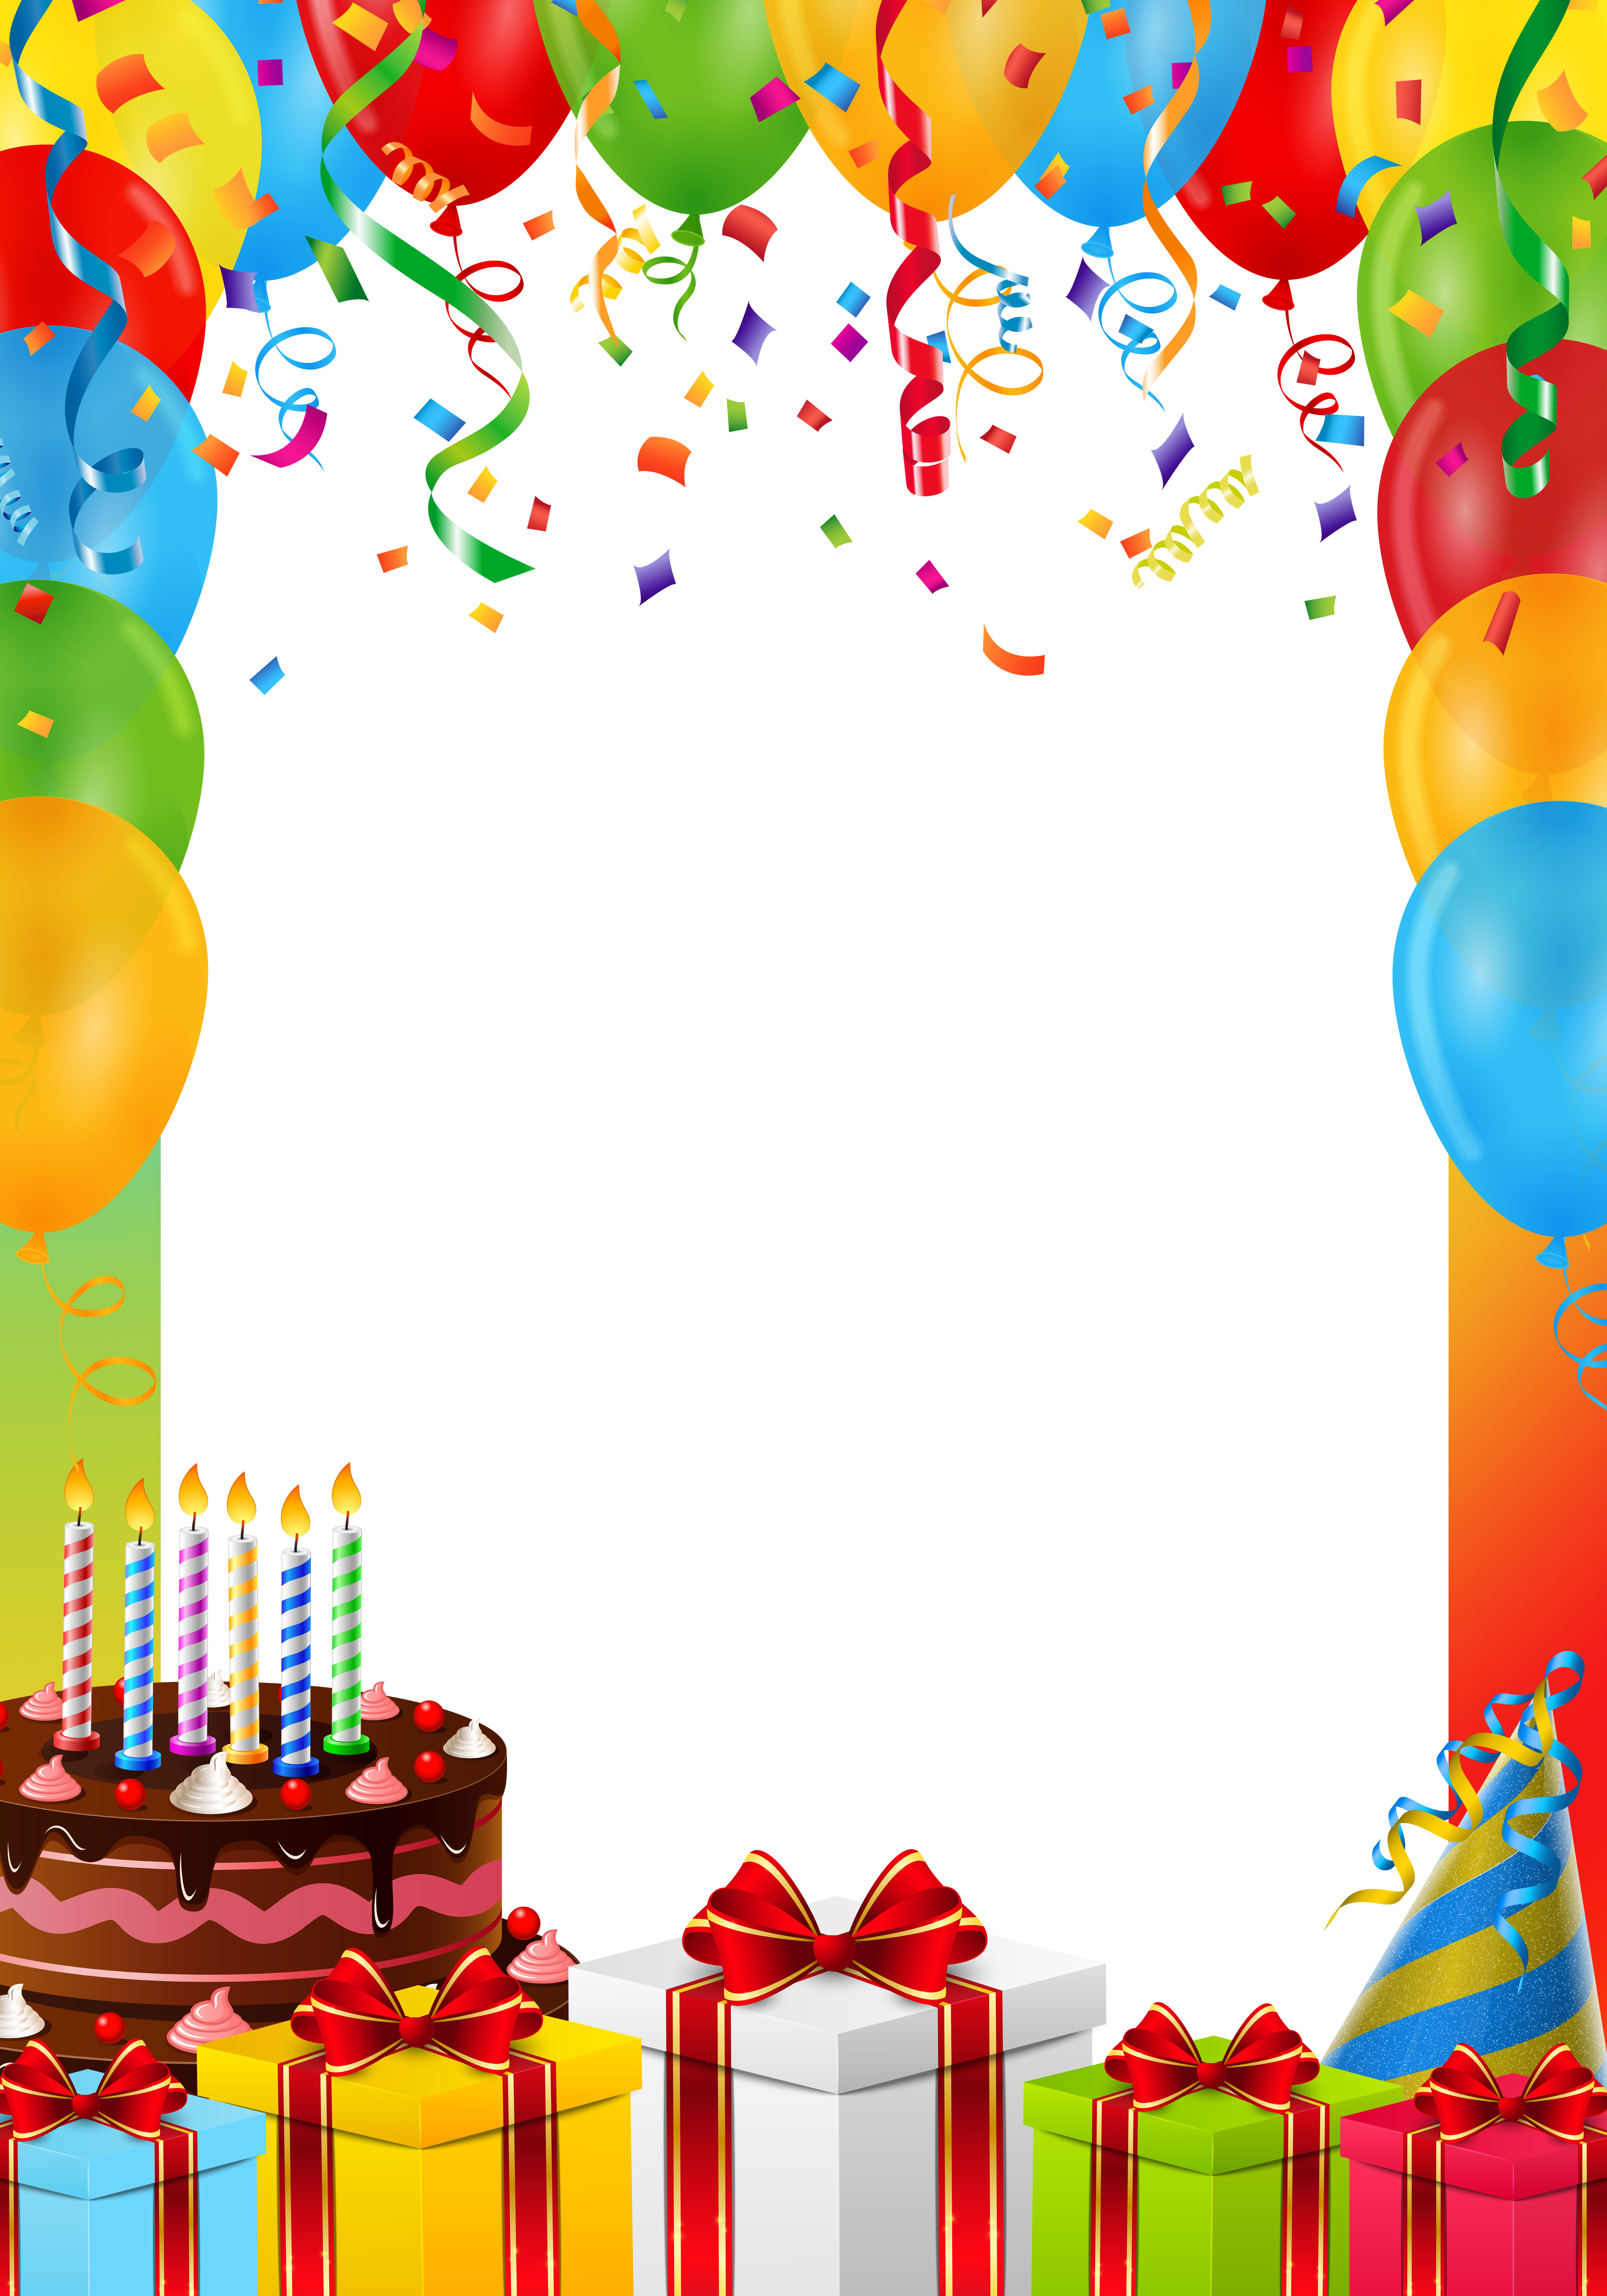 Birthday Frame PNG Transparent Image | Gallery Yopriceville - High